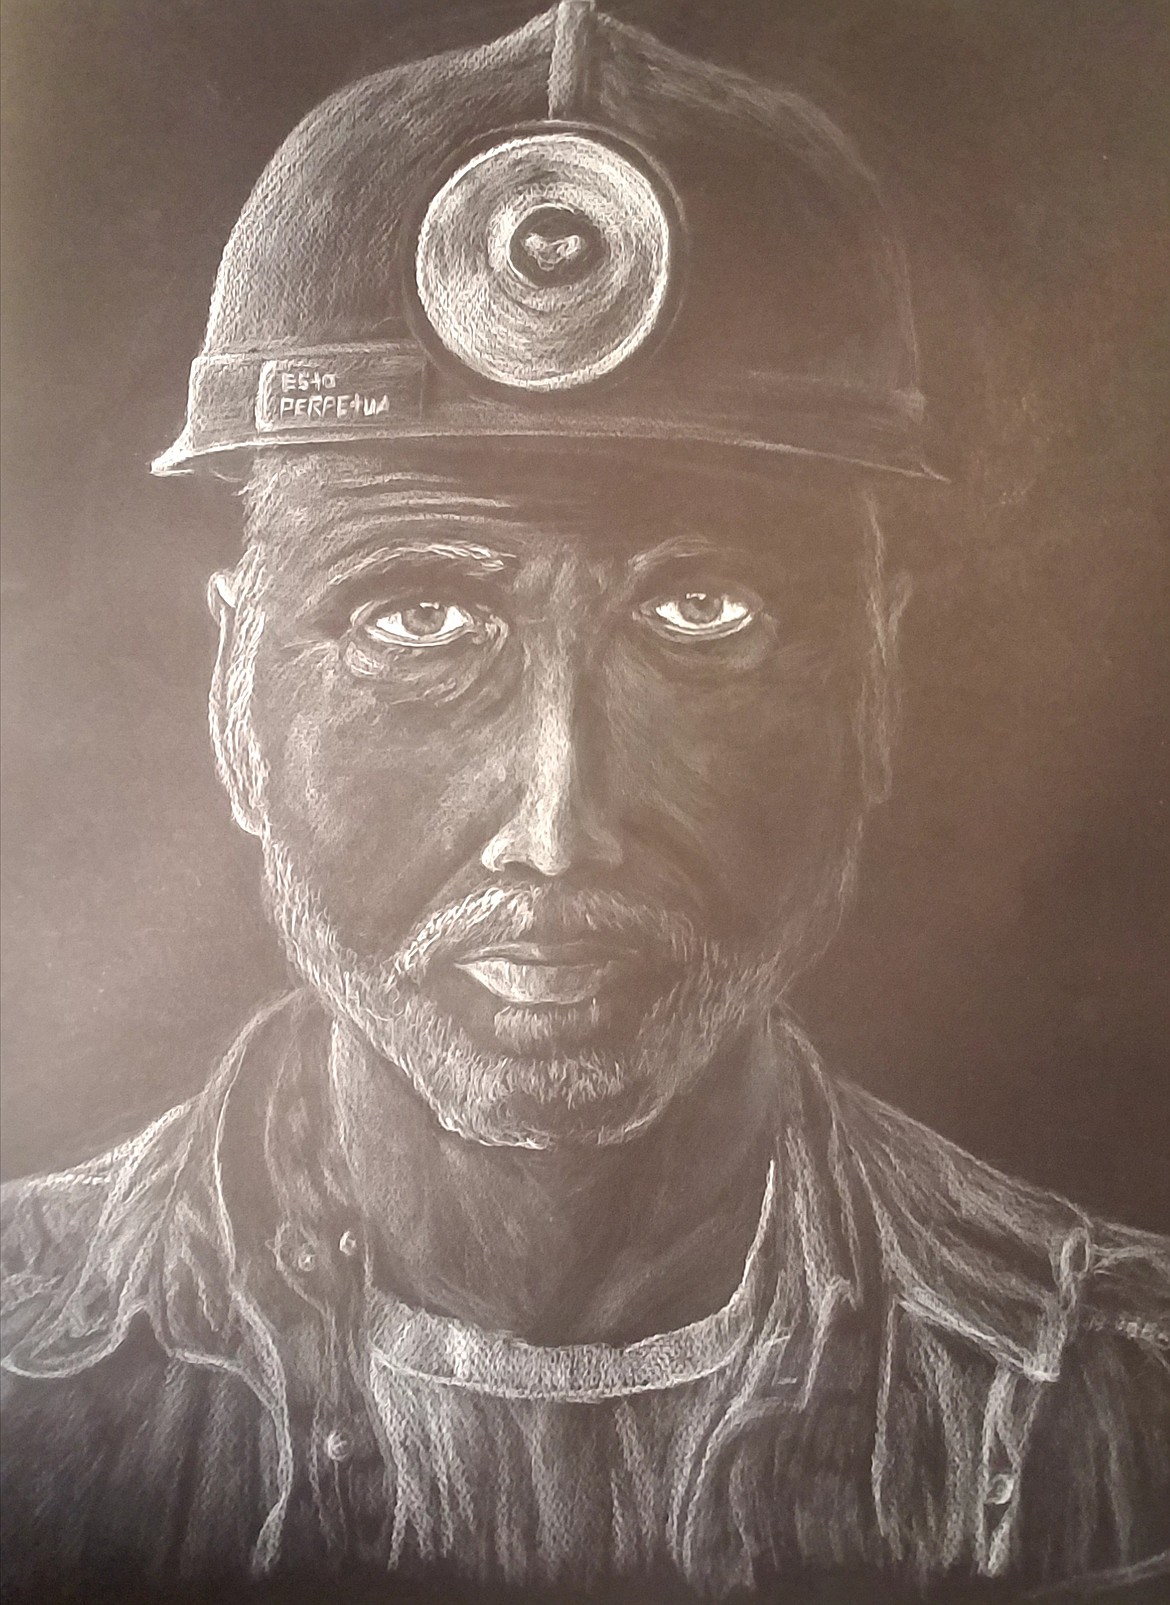 Courtesy photo
Coeur d'Alene junior Connor McMurray's drawing &quot;Coeur d' Le Mineur&quot; won the 2017 Congressional Art Competition. It will be displayed at the U.S. Capital from June 2017 to June 18 and was selected by Raul Labrador.